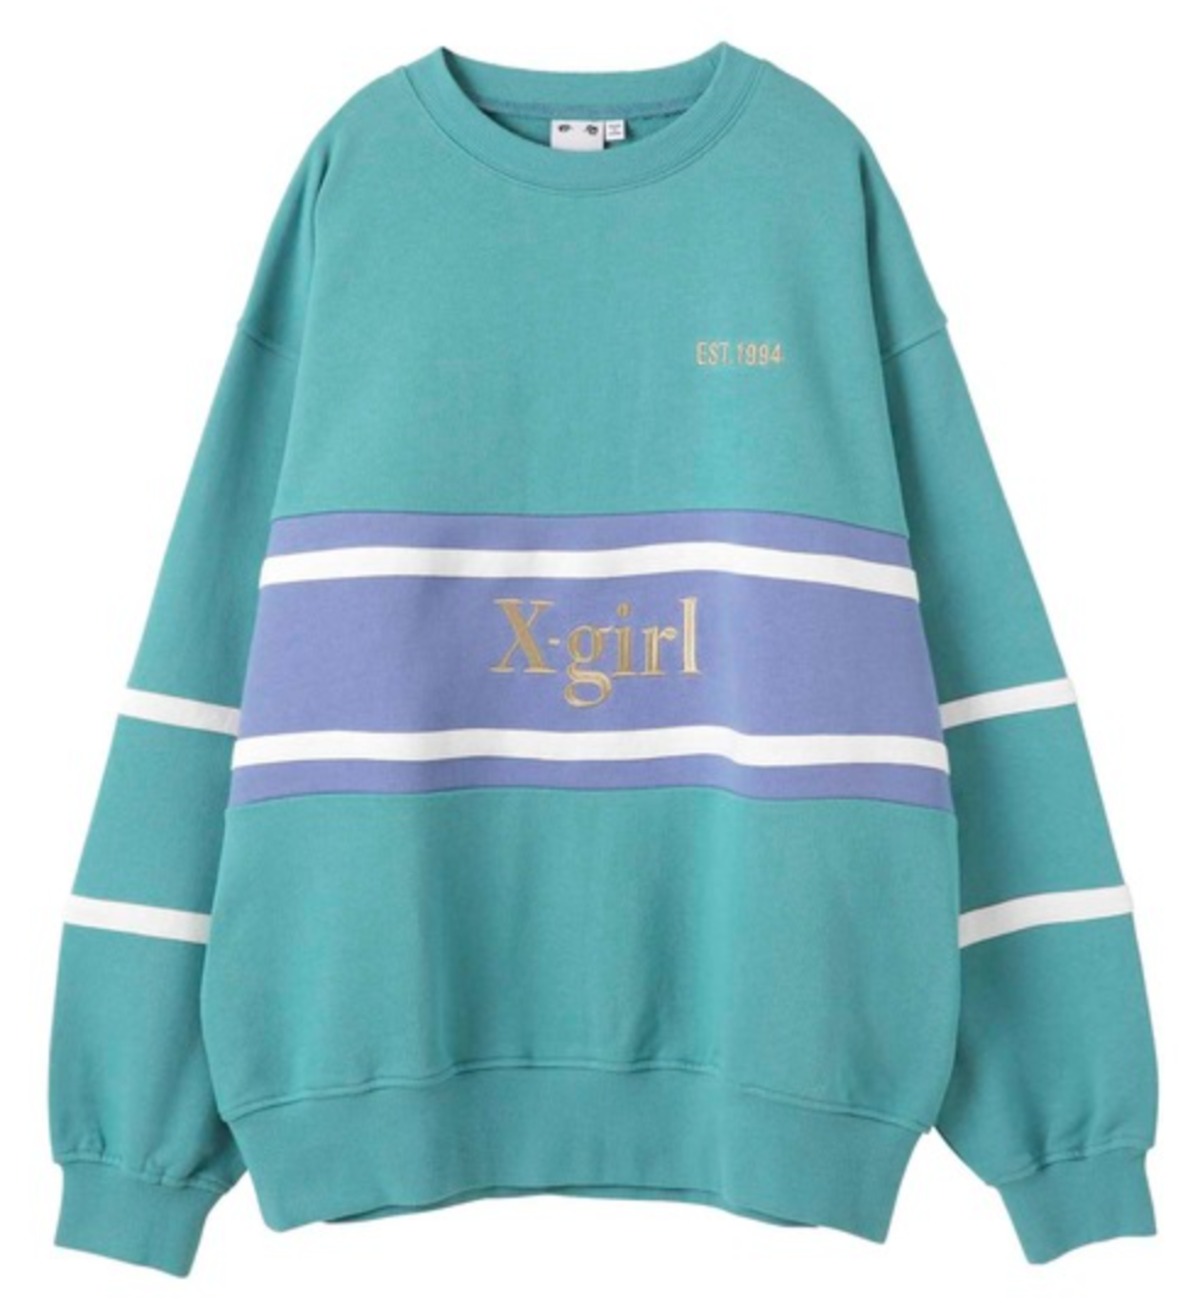 【X-girl】OLDIES SWEAT TOP スウェット　【xgirl】【xg】【エックスガール】 | INCEPTION powered by  BASE